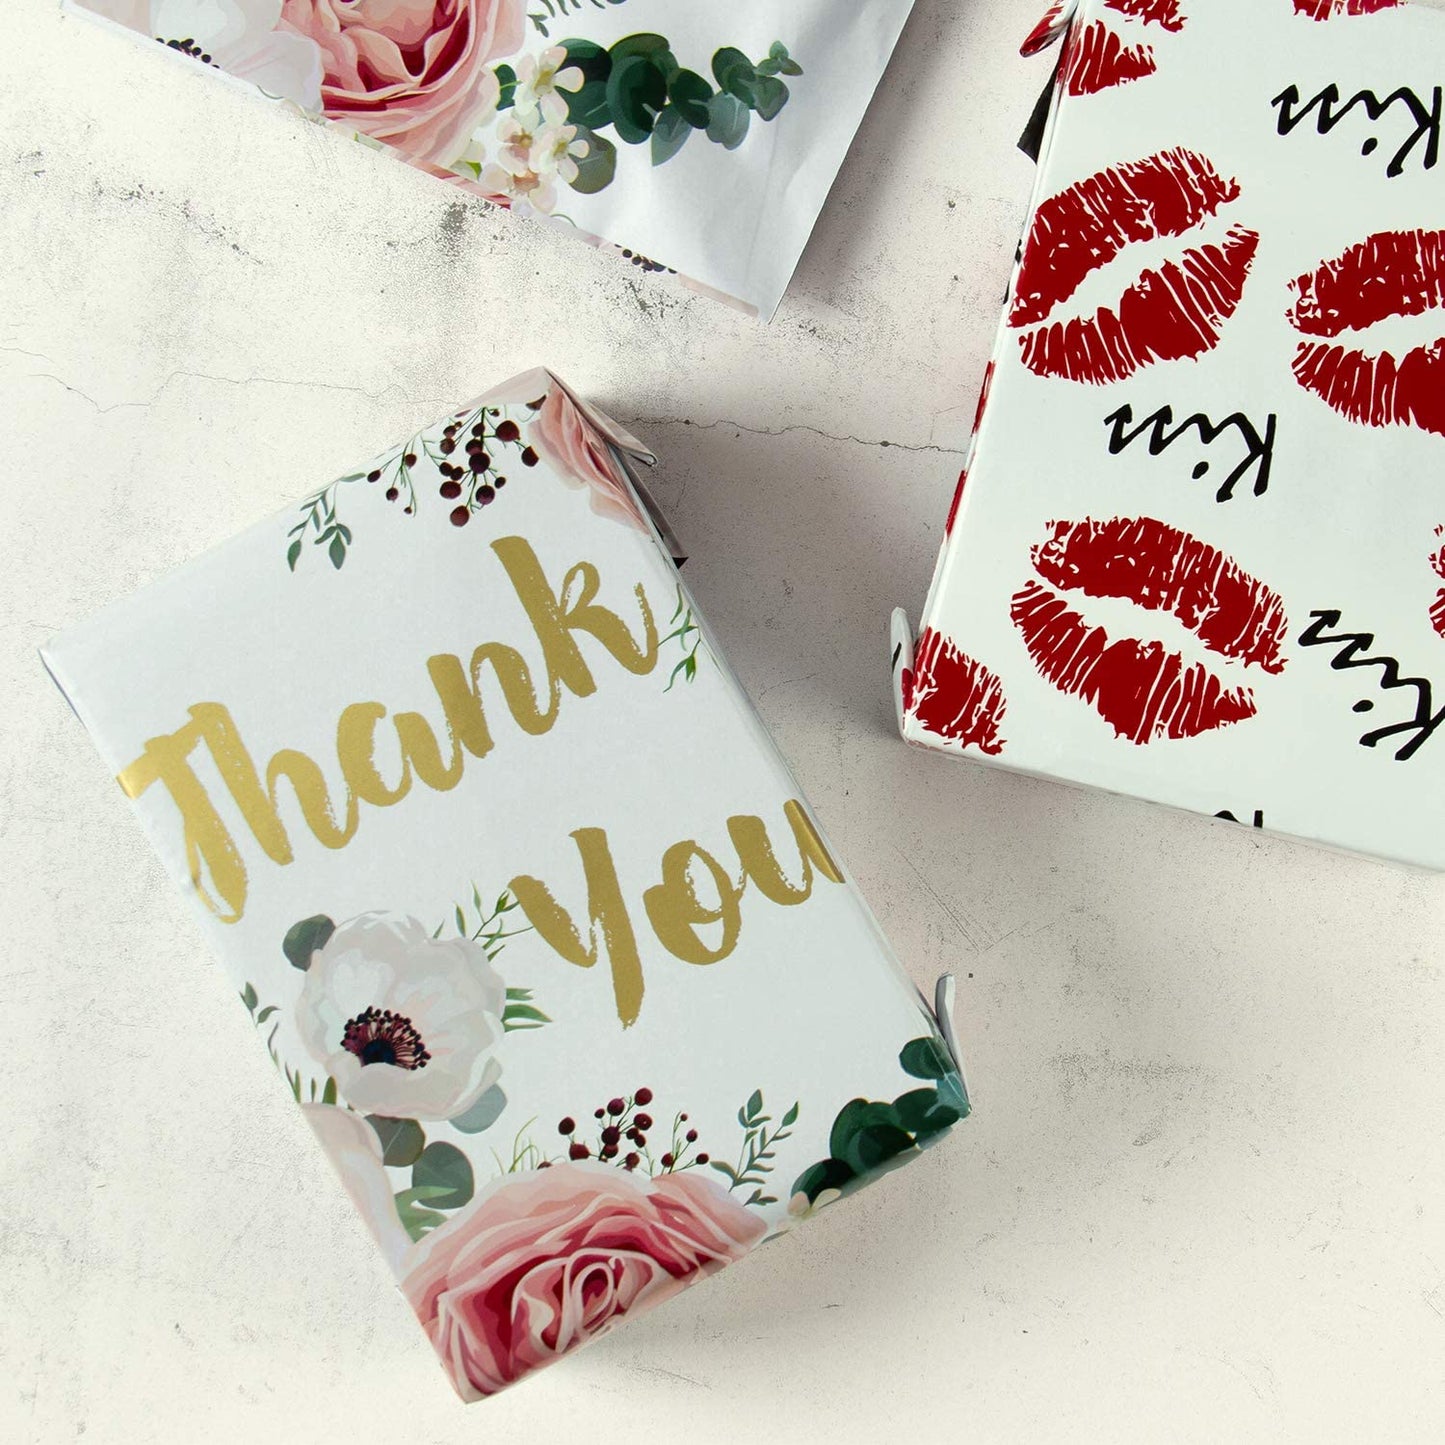 WRAPLA 15 x 23cm Poly Mailers Shipping Bags Thank You Notes Flowers Surrounded White Poly Mailers 2.3 Mil Heavy Duty Self Seal Mailing Envelopes - 100 Pack